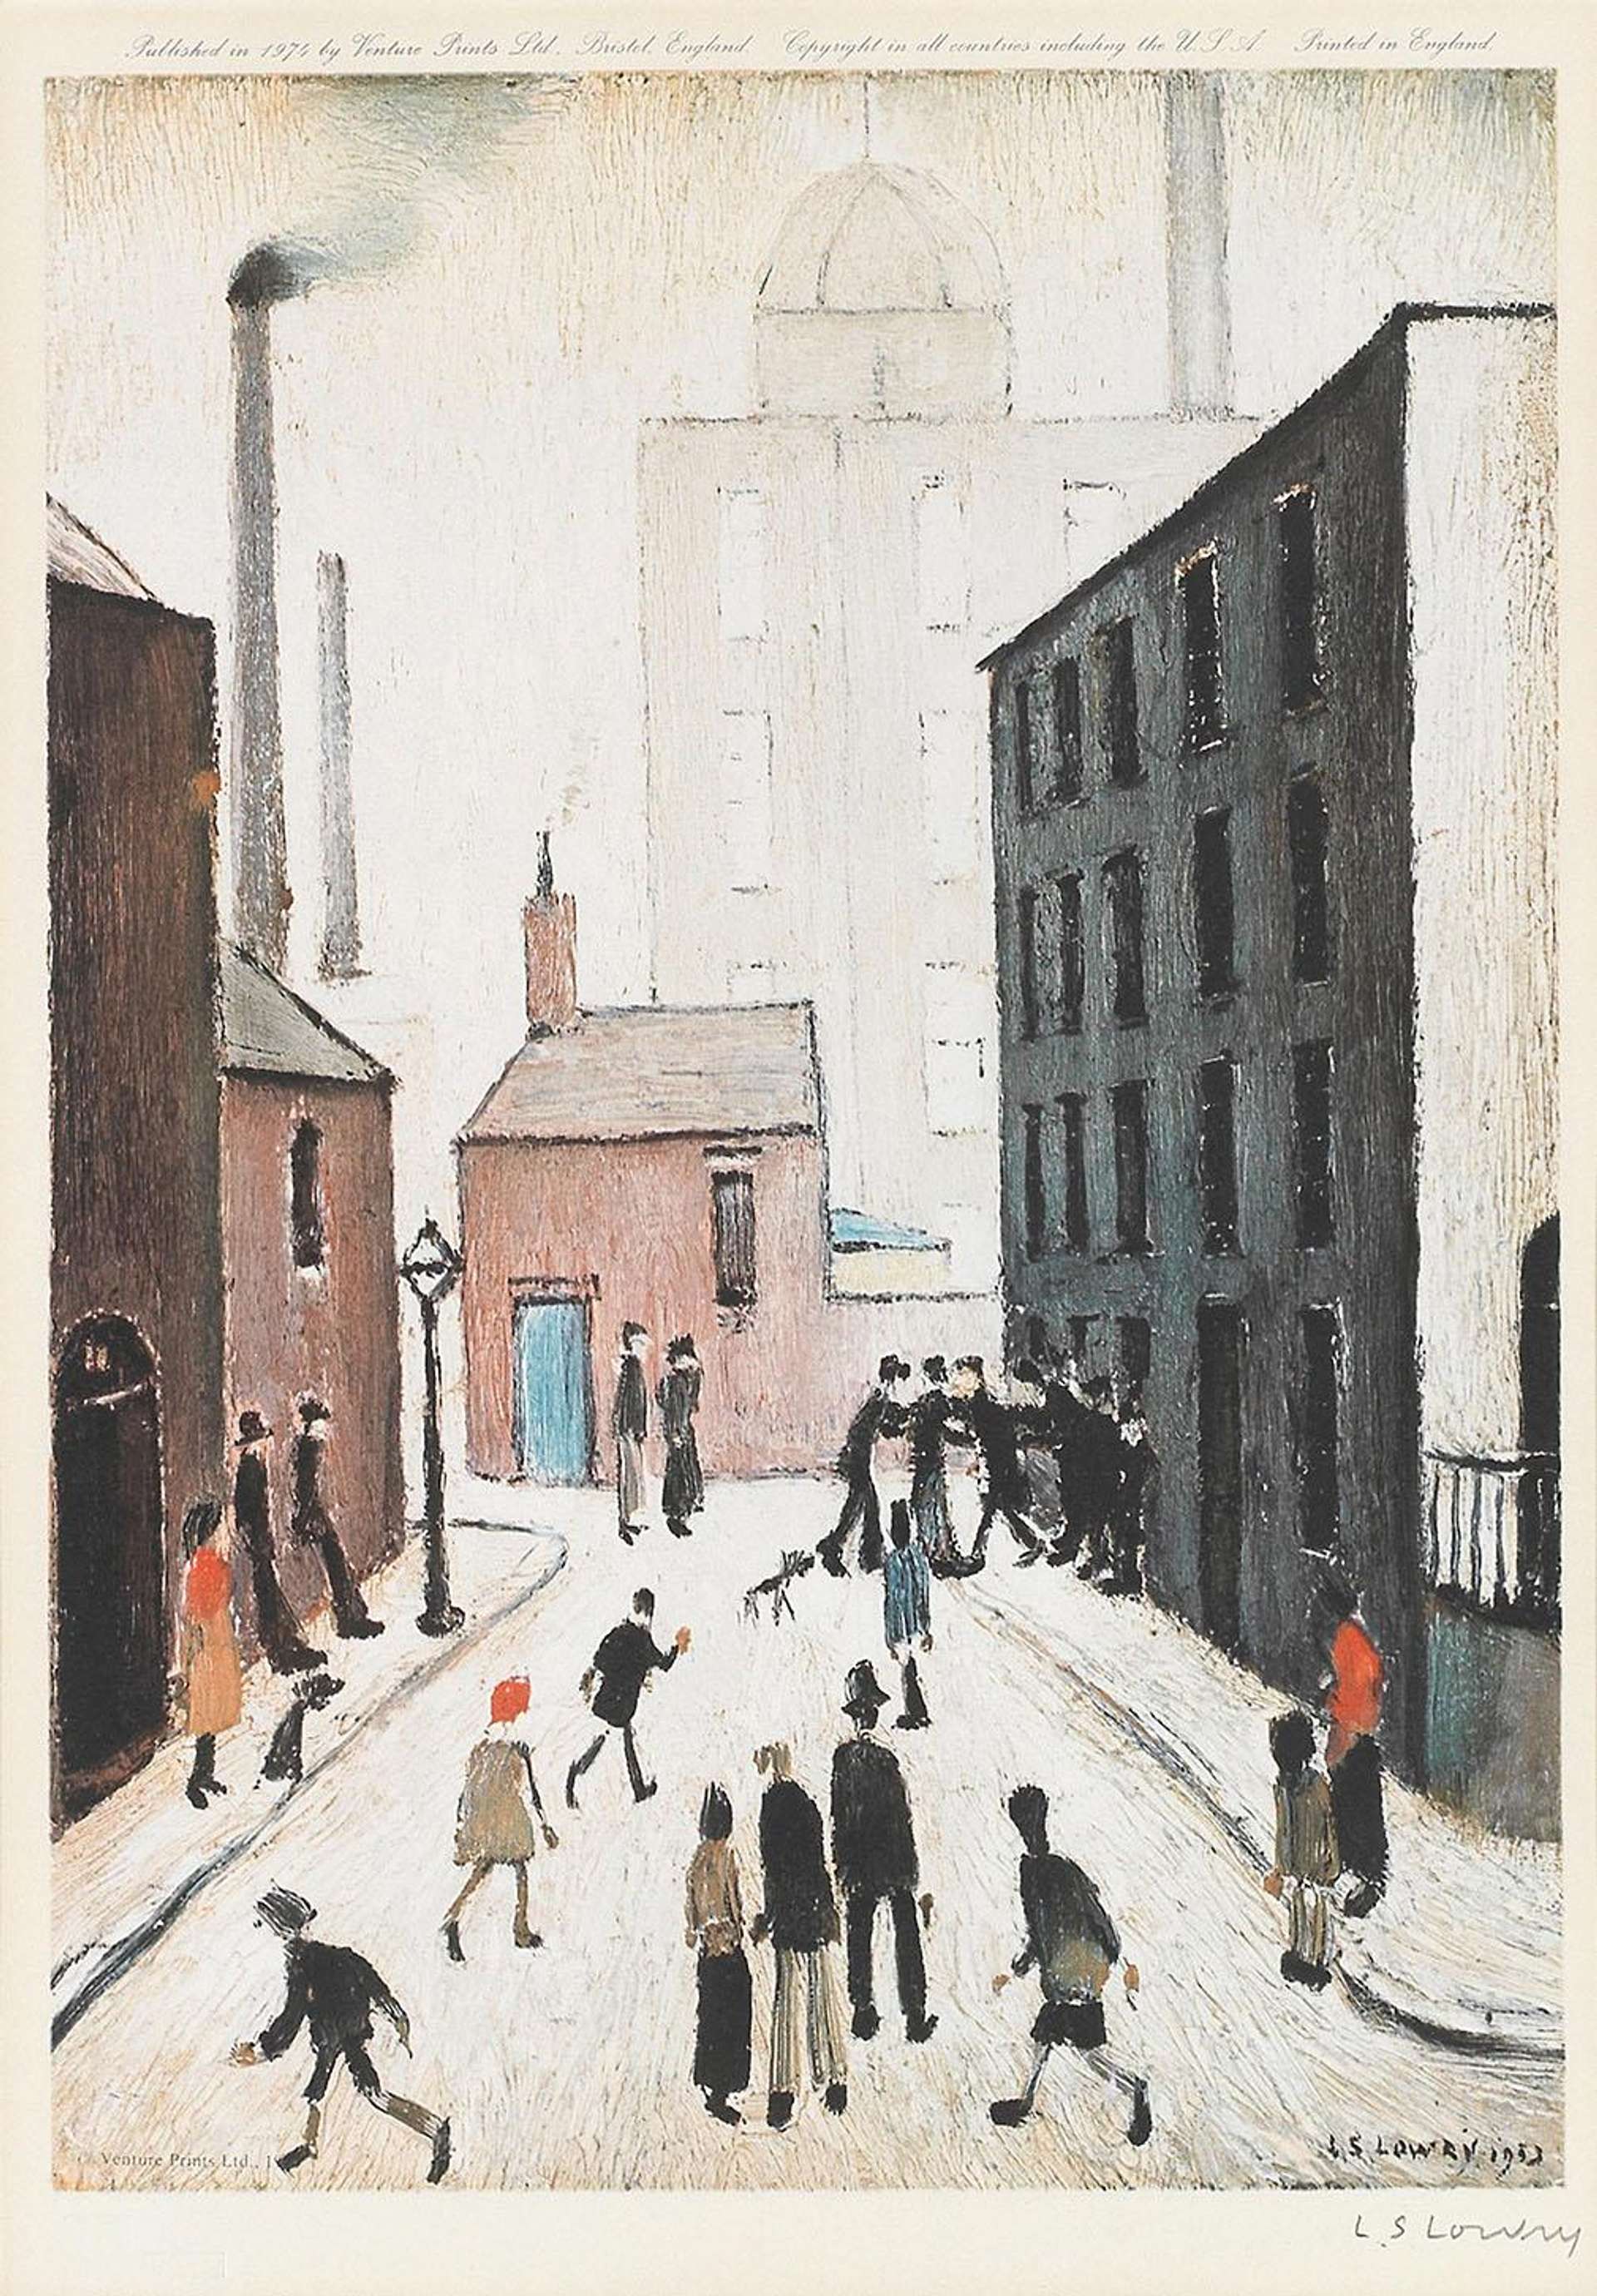 L.S. Lowry’s Industrial Scene. A view of a town street with locals standing in the street and around buildings